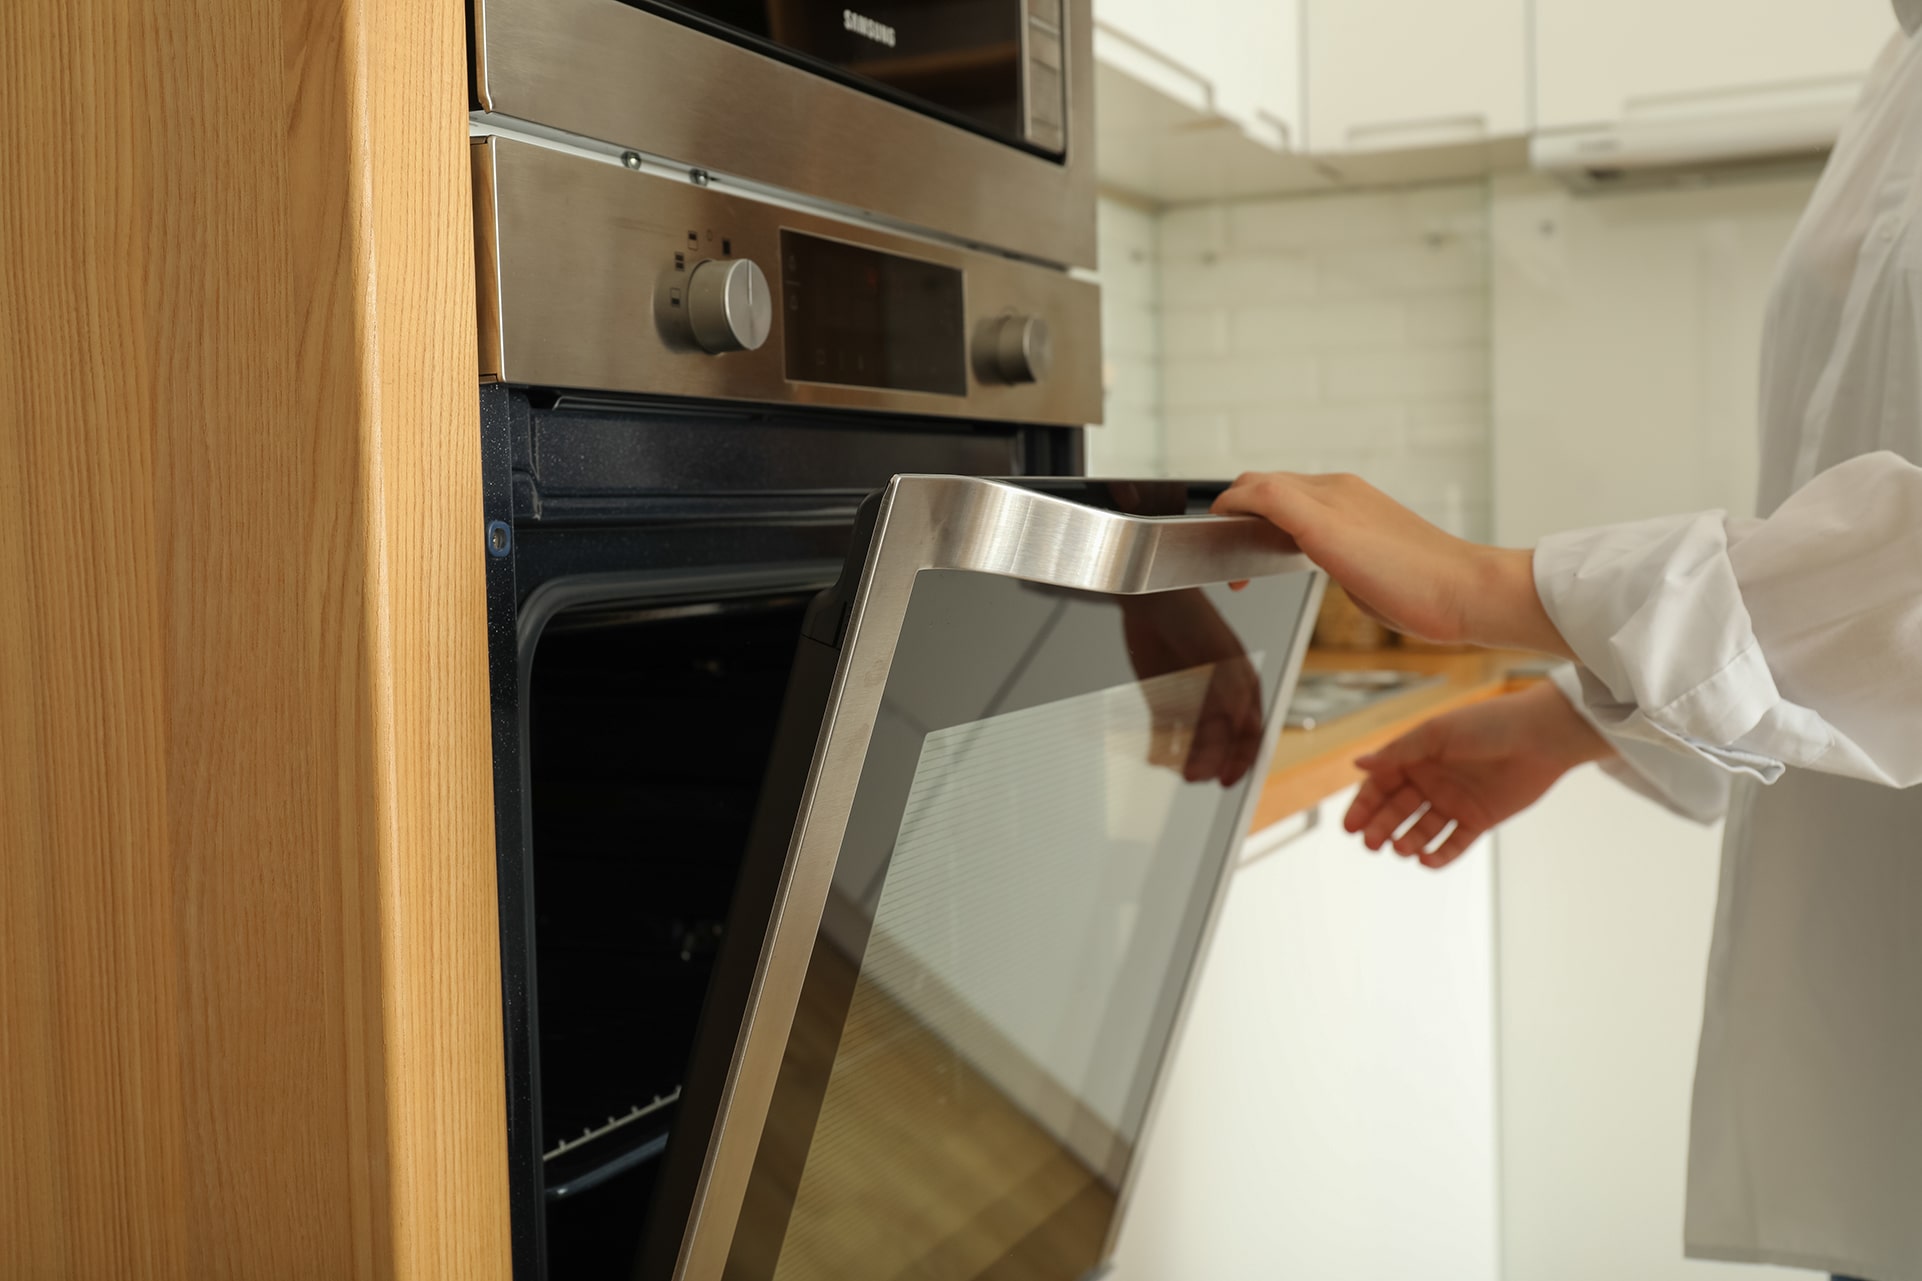 ac not cooling ovens can contribute to the heat inside your home